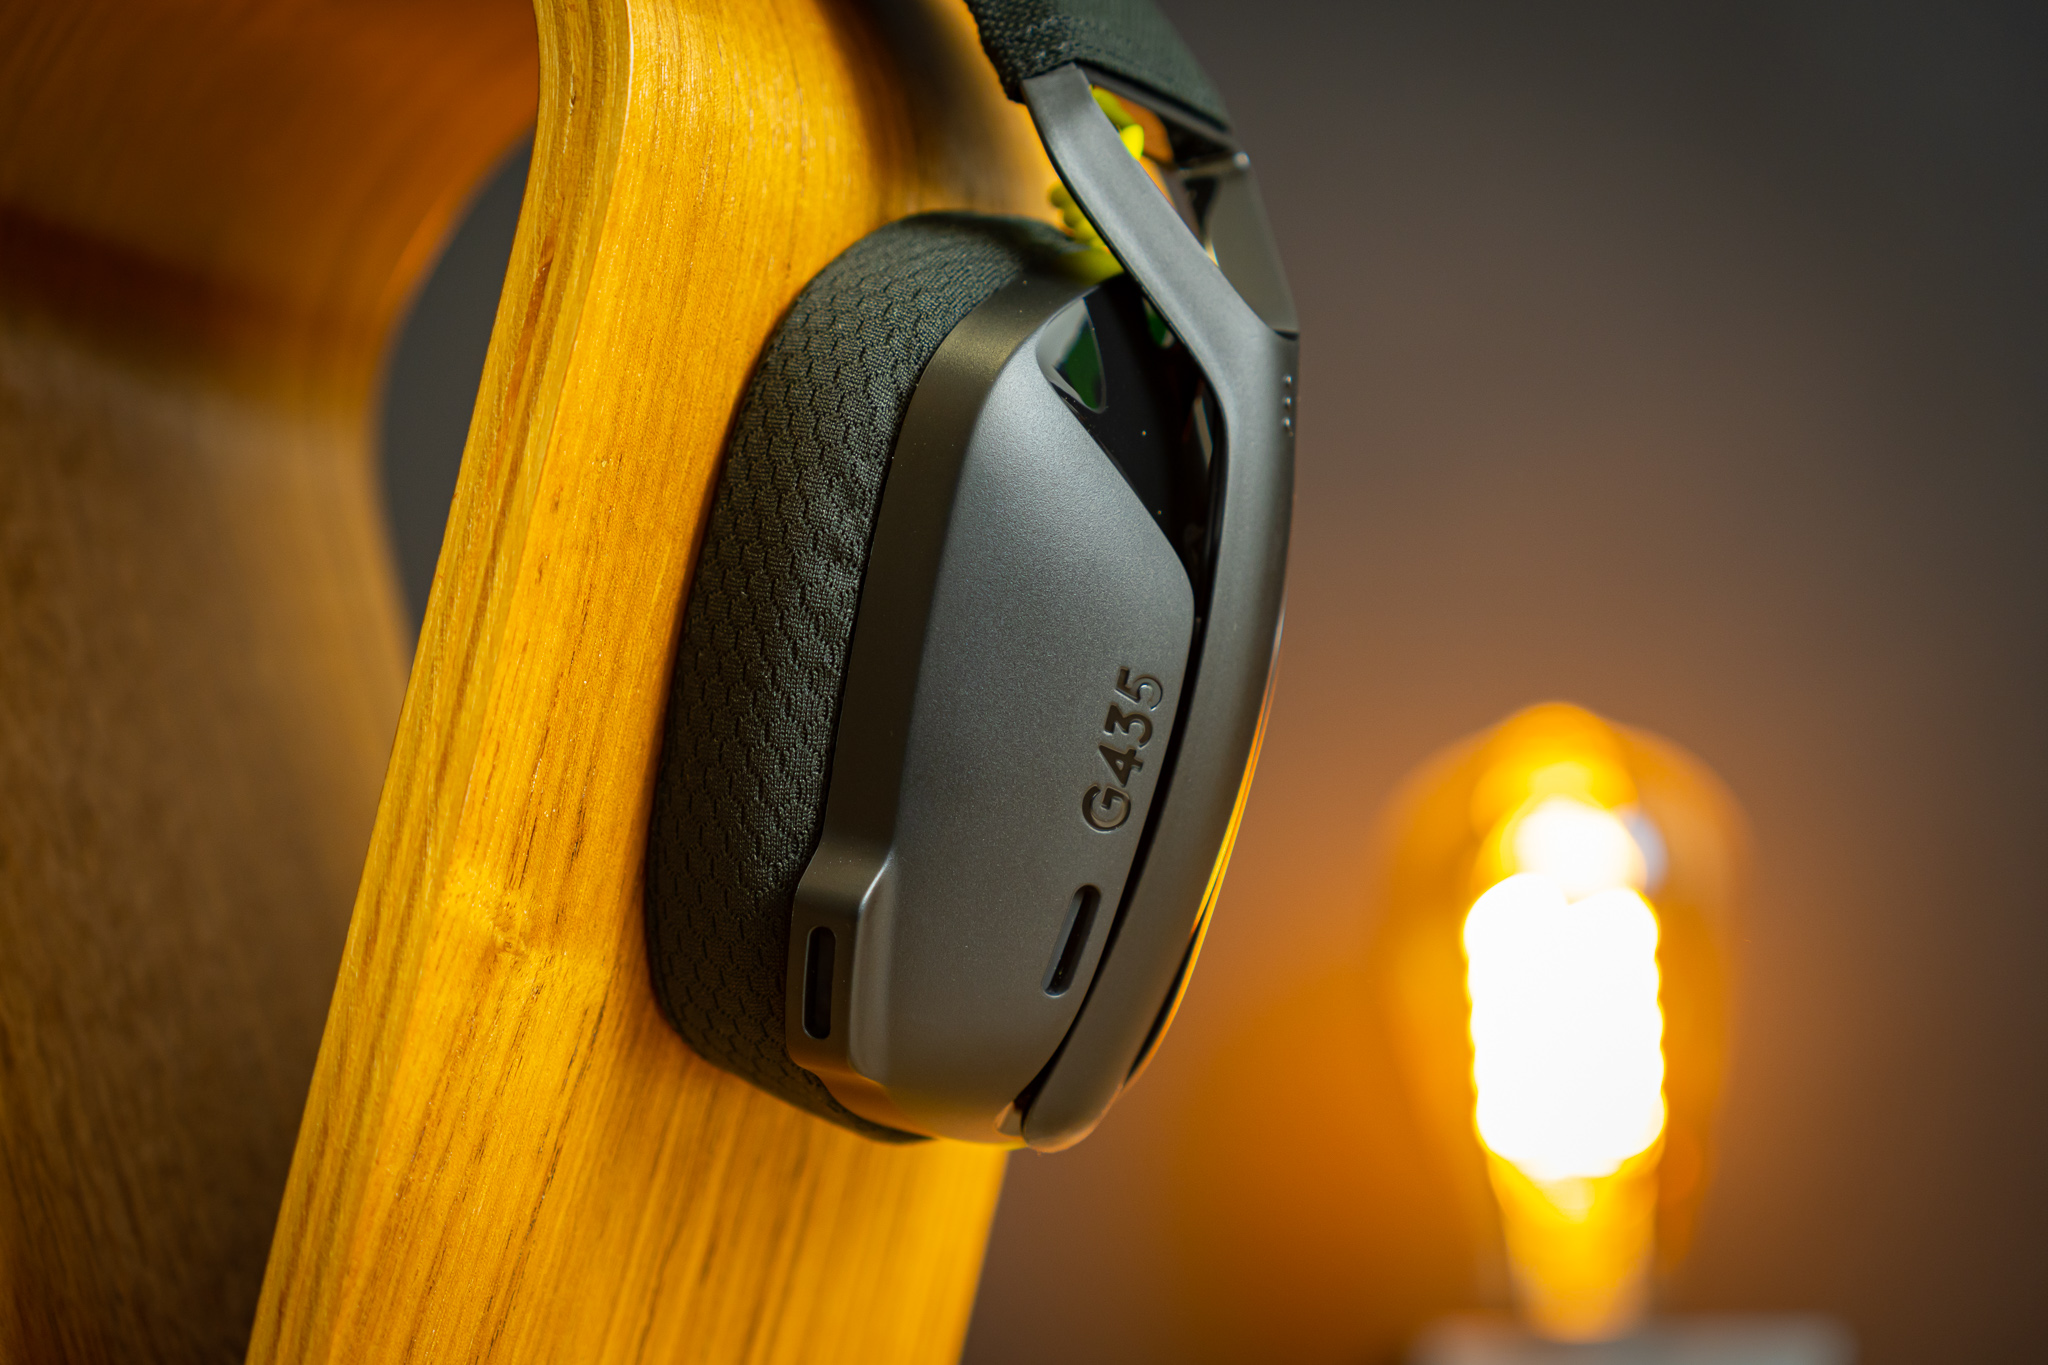 Logitech G435 Gaming Headset Review: Too Cheap to Be Good